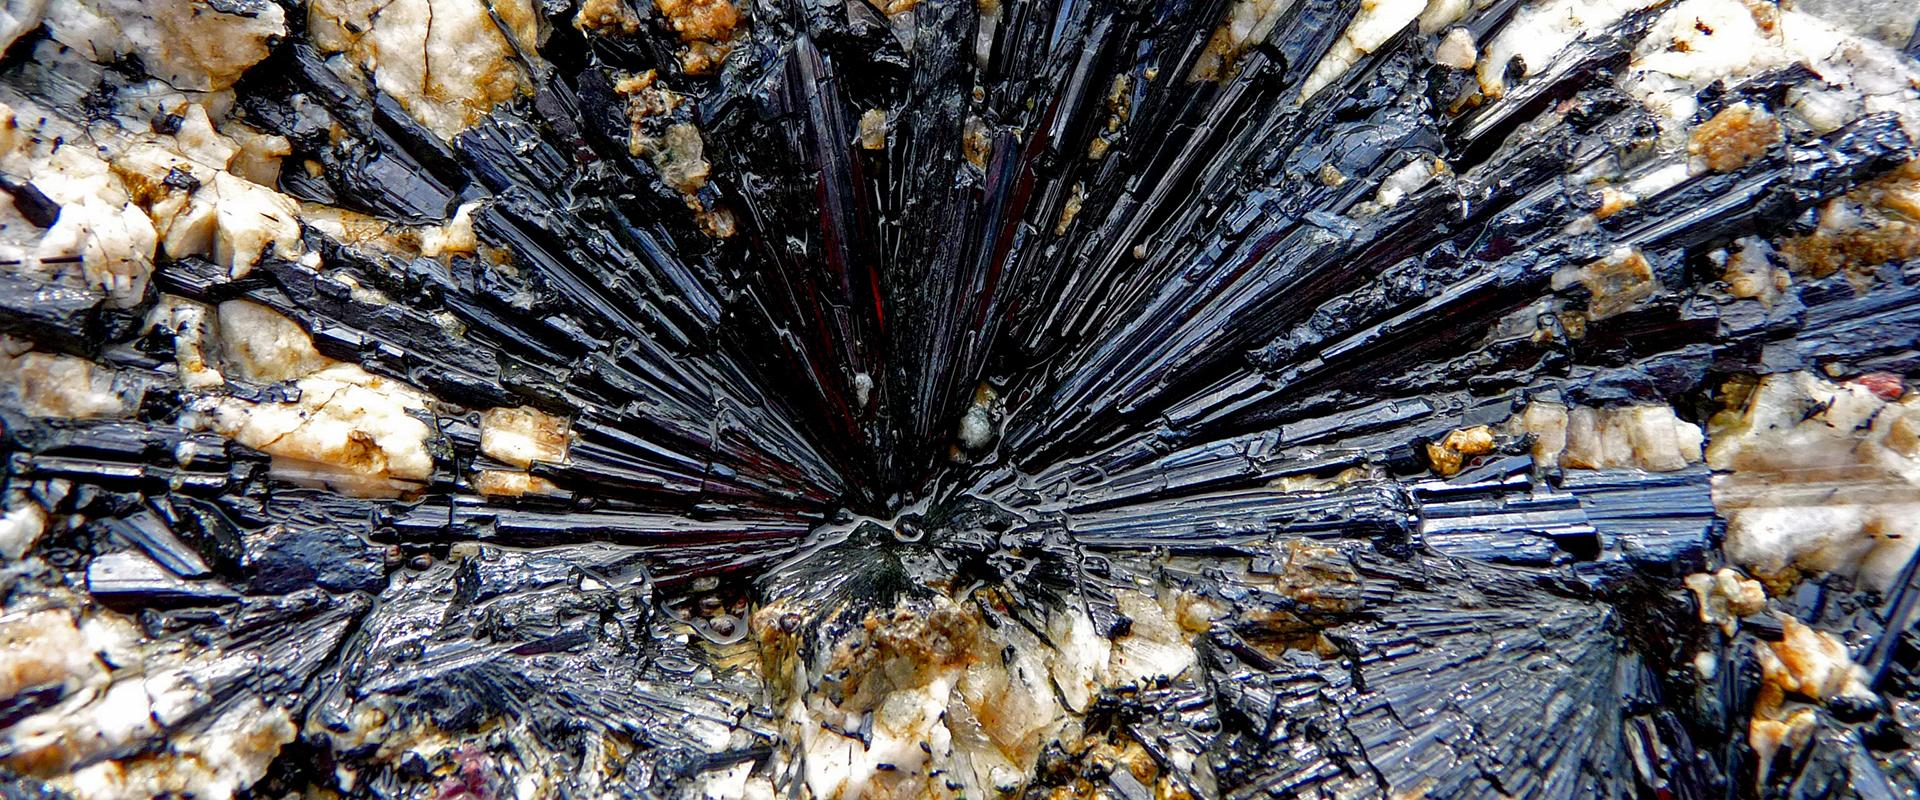 "Star" arfvedsonite from the rare-earth-bearing alkaline complex at Kringlerne, Greenland